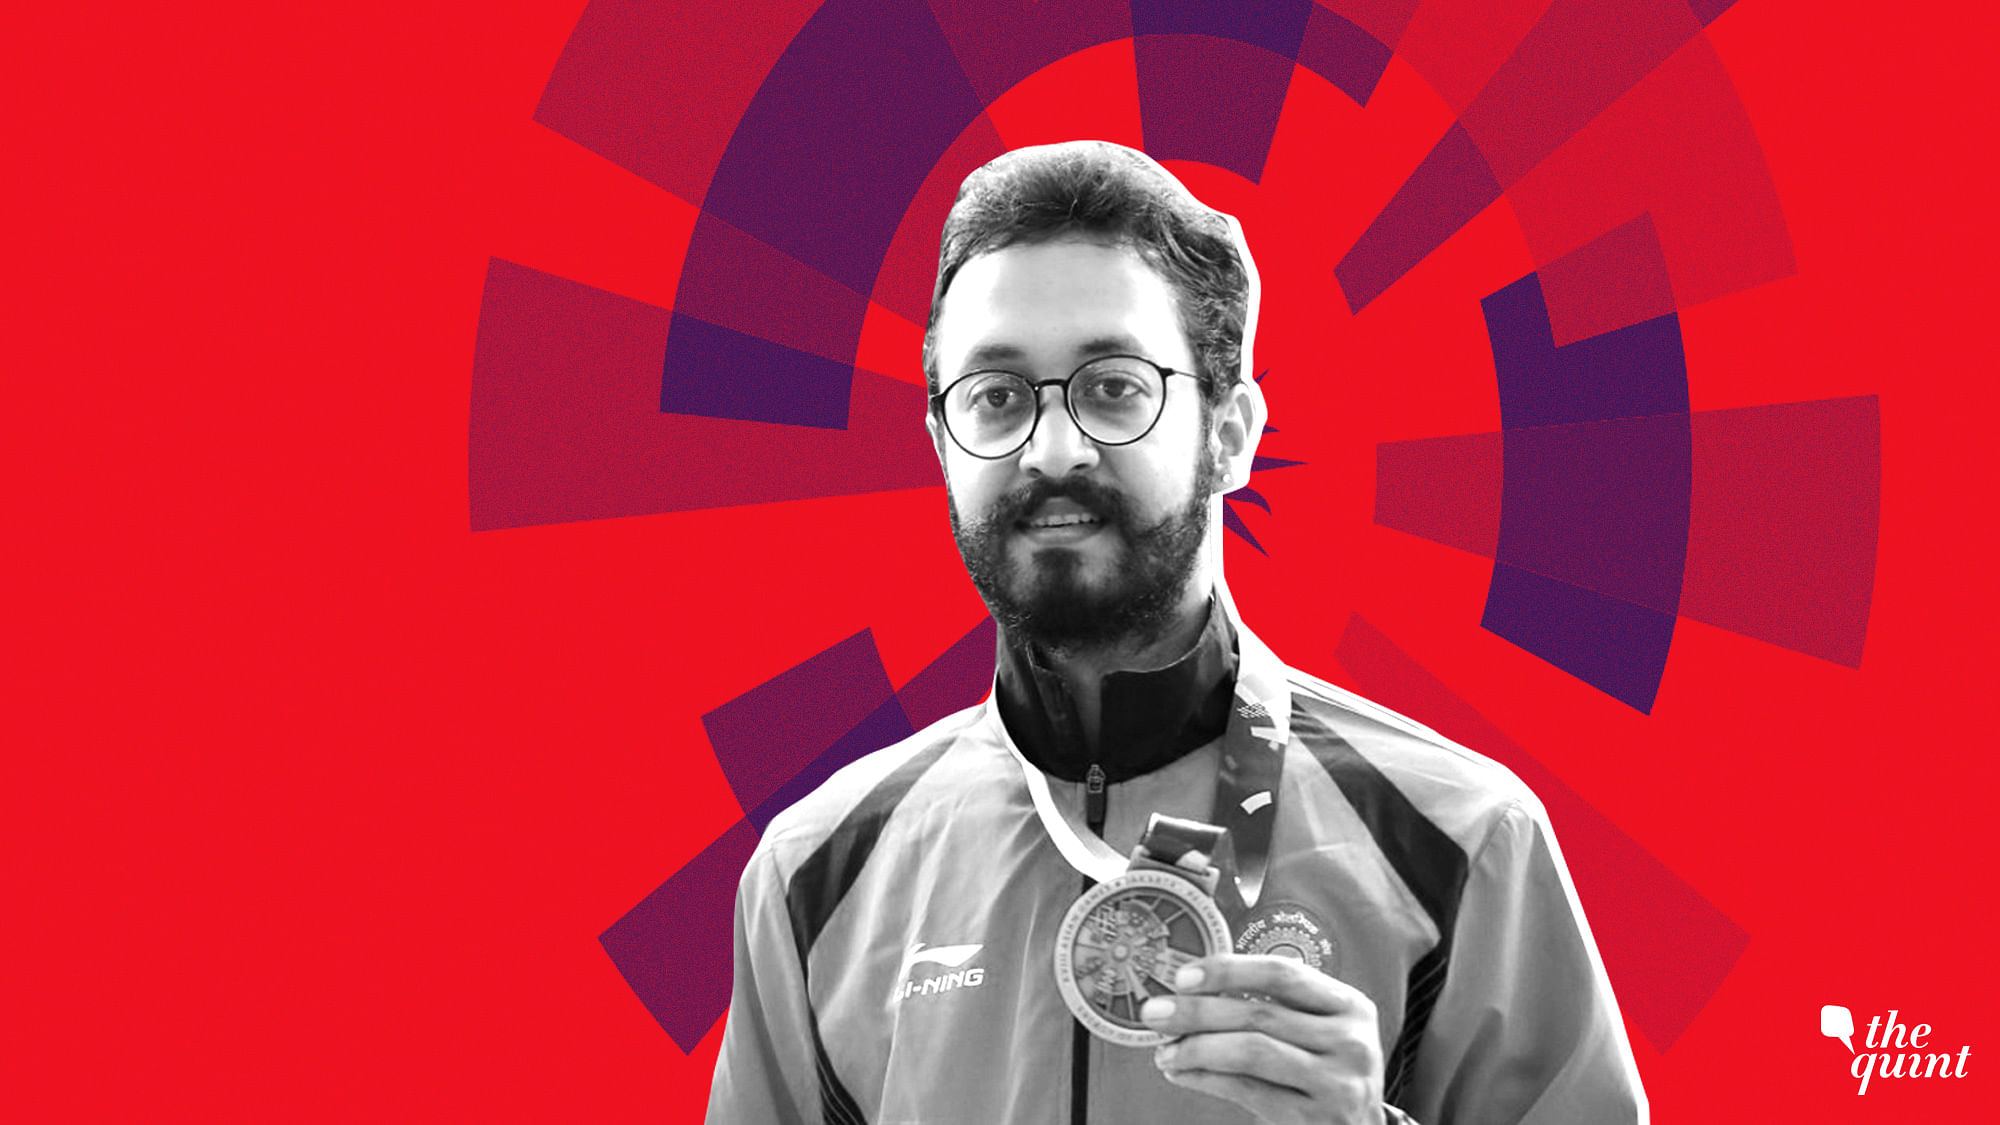 After winning a bronze at the 2018 Asian Games, Abhishek Verma is now vying for further glory at the ISSF World Cup in New Delhi.